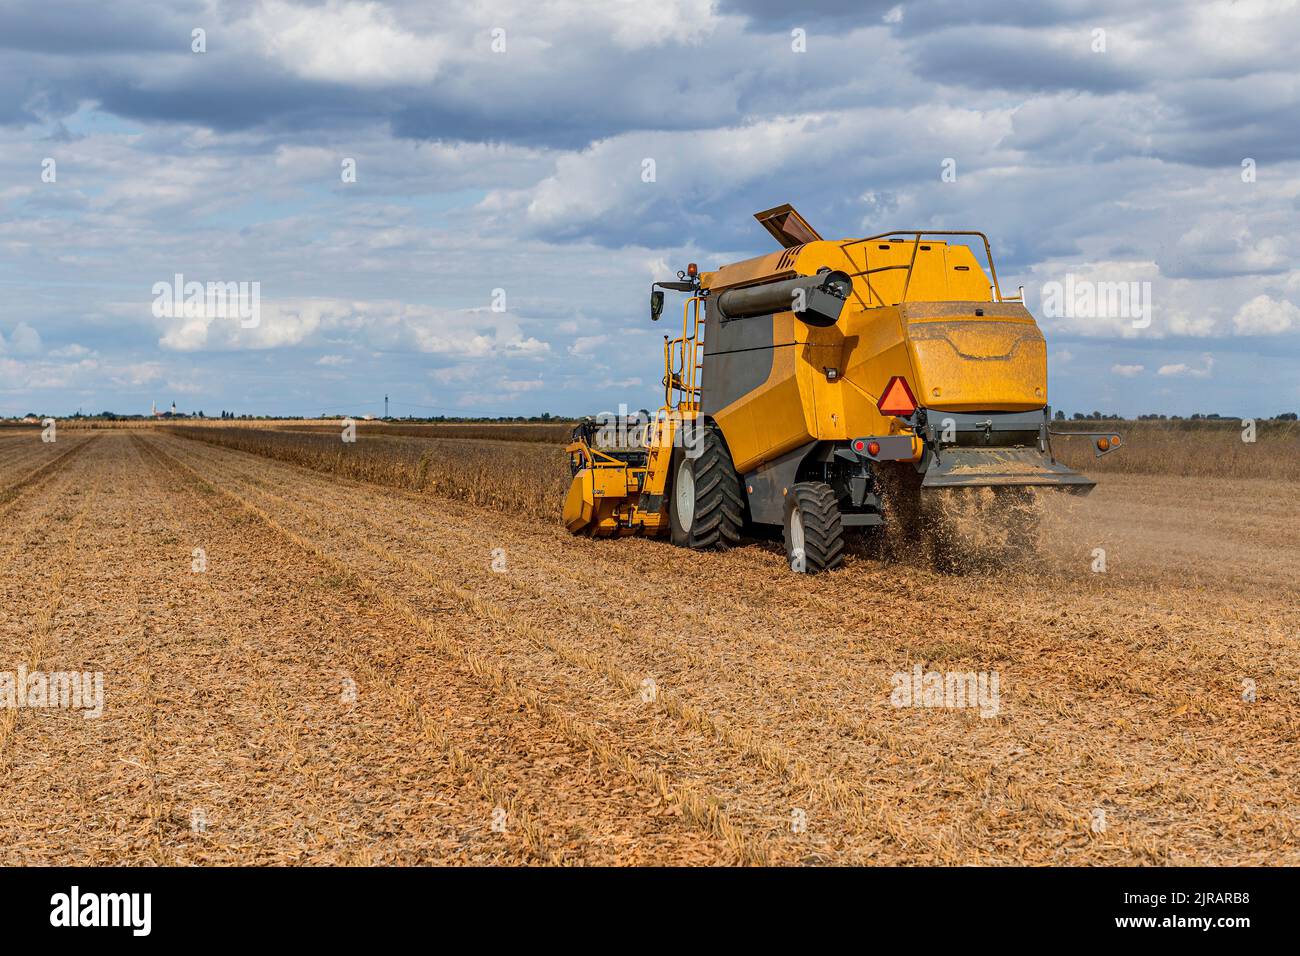 Machinery harvesting soybean on field Stock Photo